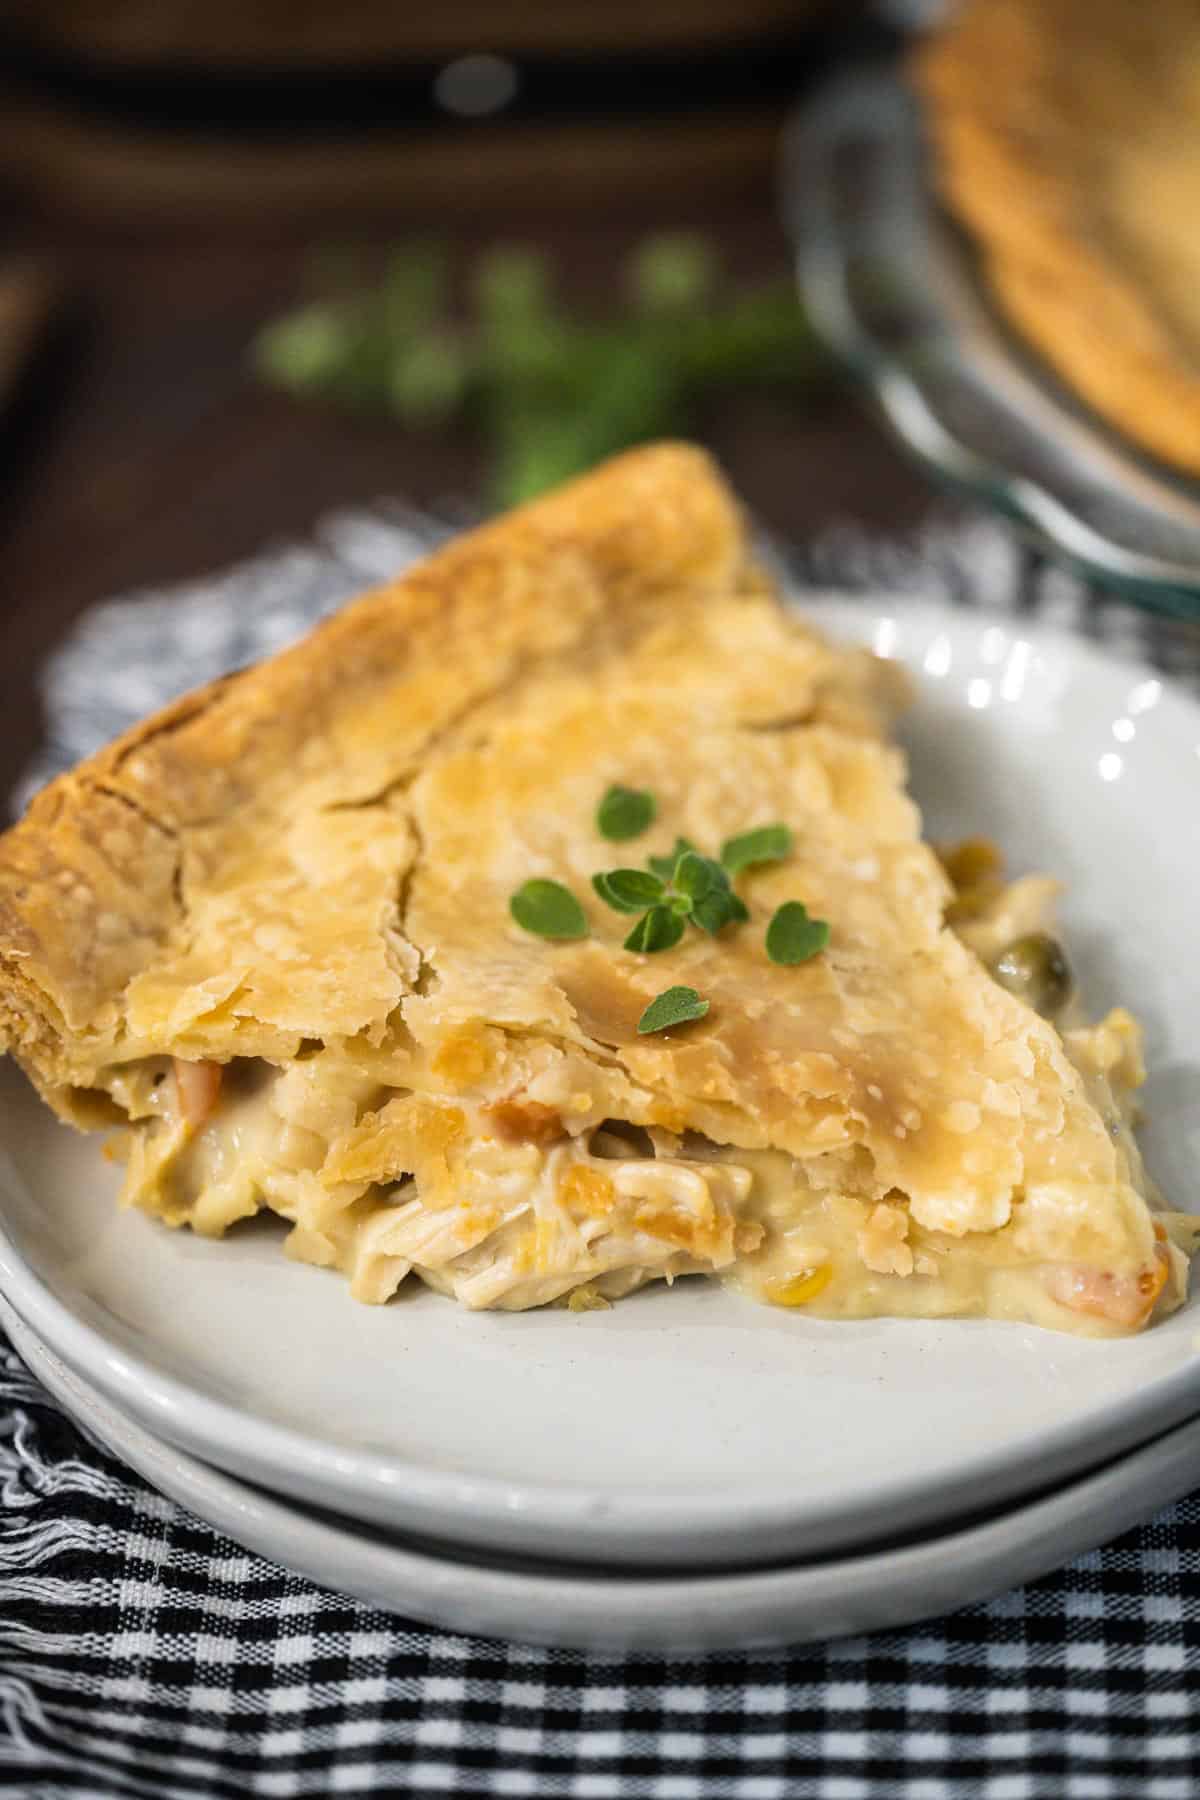 An upclose image of a flaky chicken pot pie with fresh thyme sprinkled on top.